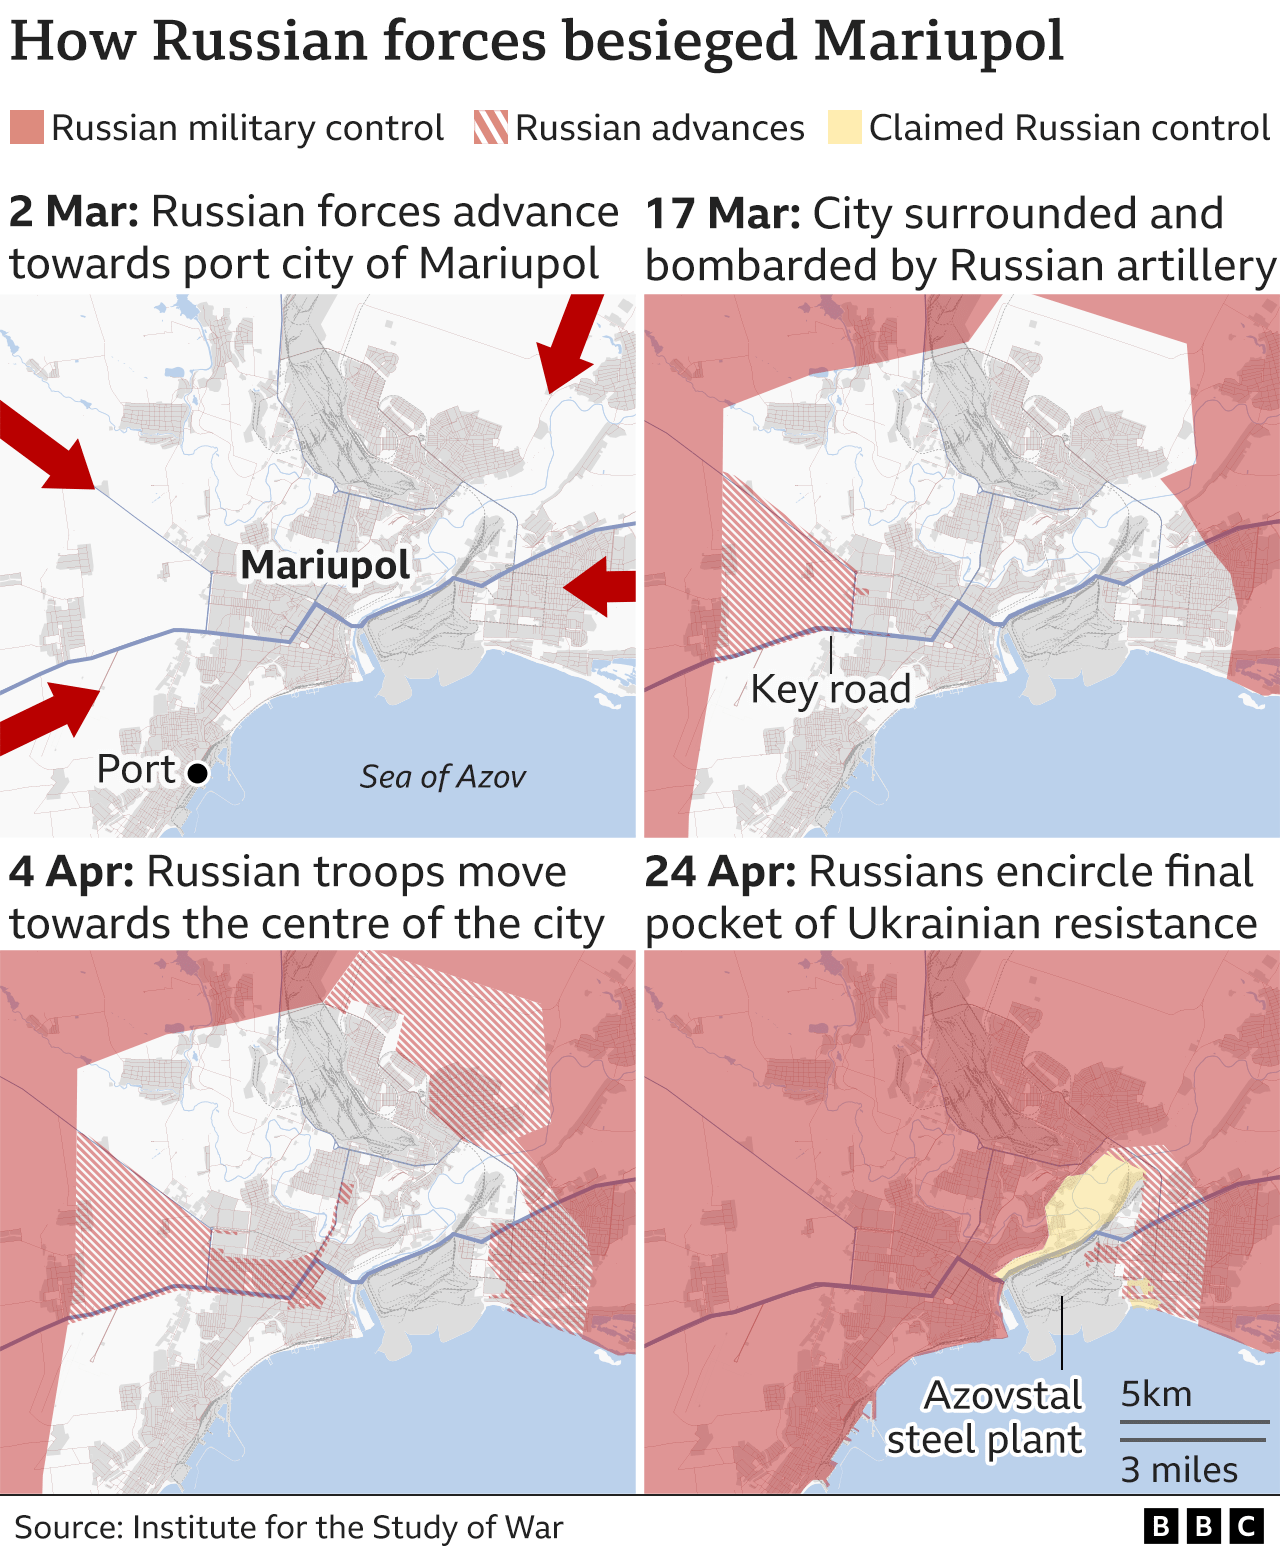 Maps showing how Mariupol has been besieged by Russian forces